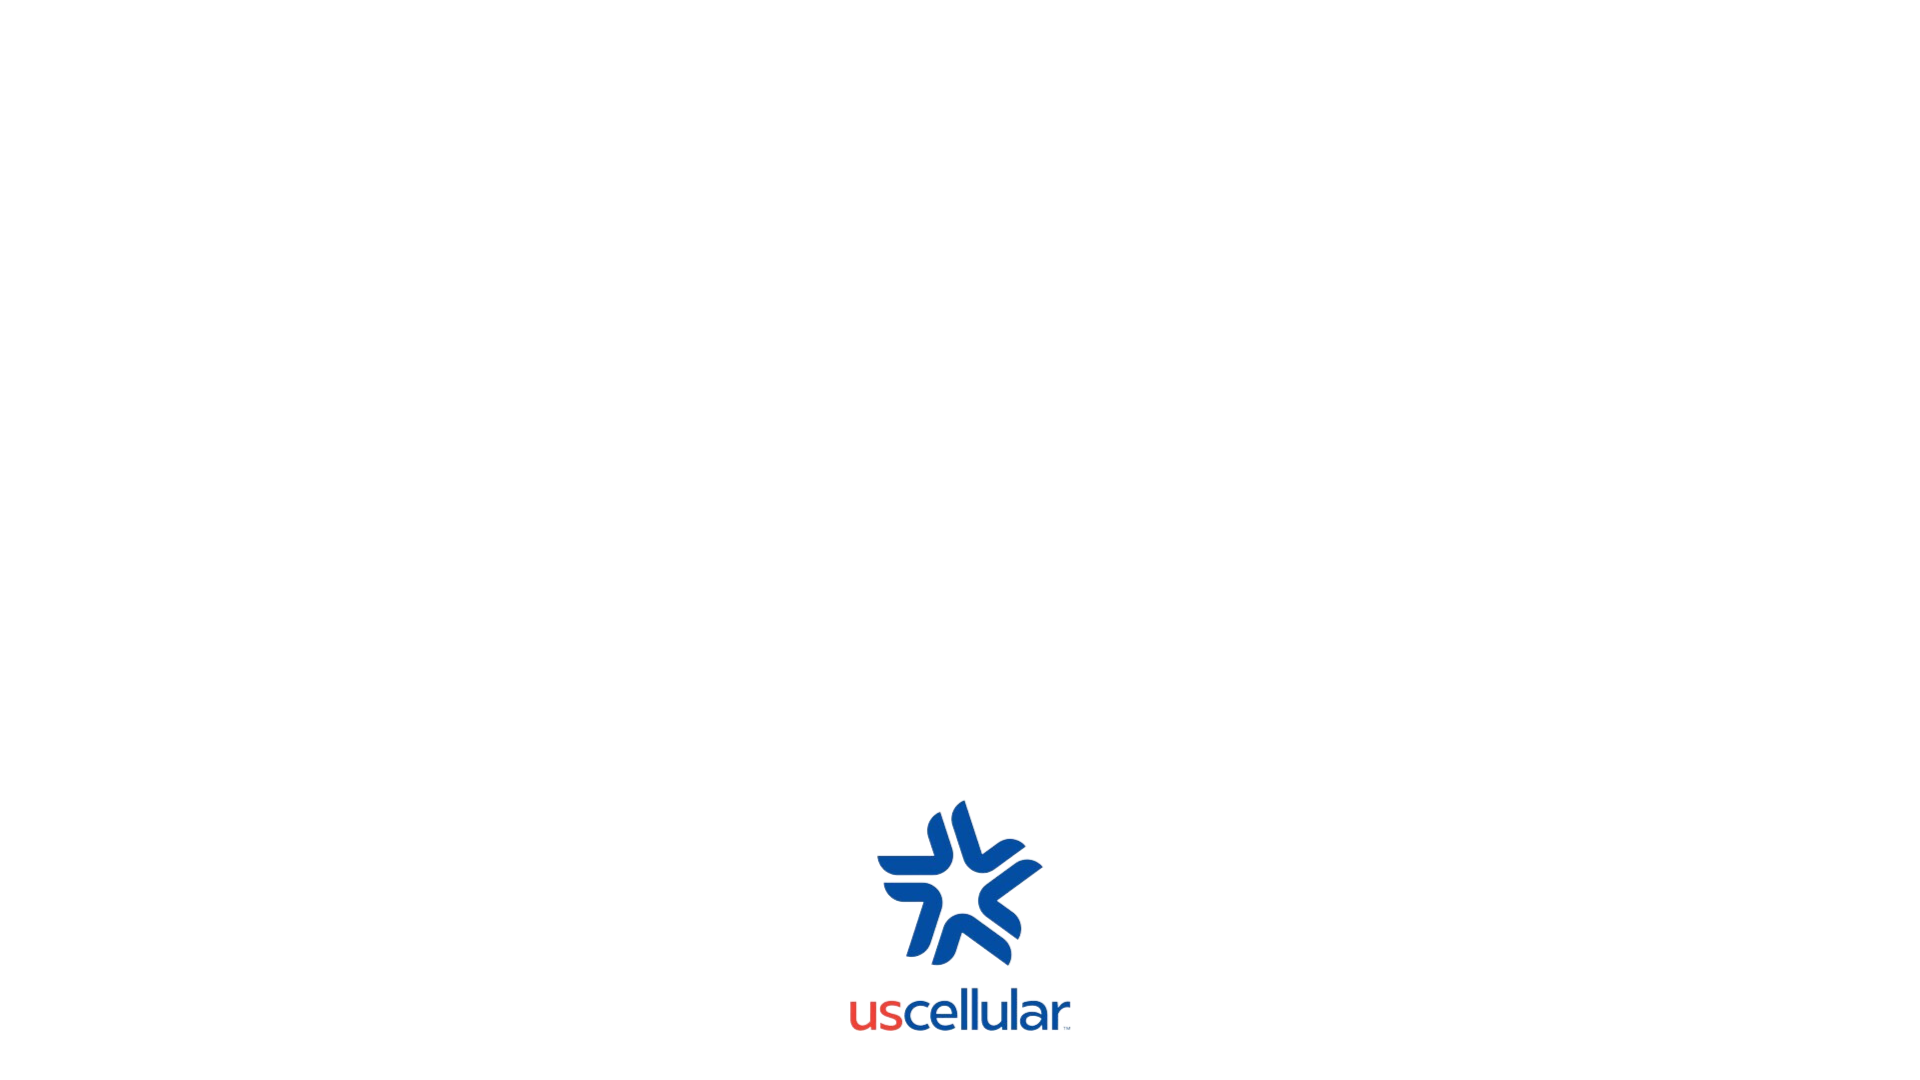 A white background with a blue star and the word uscellular on it.